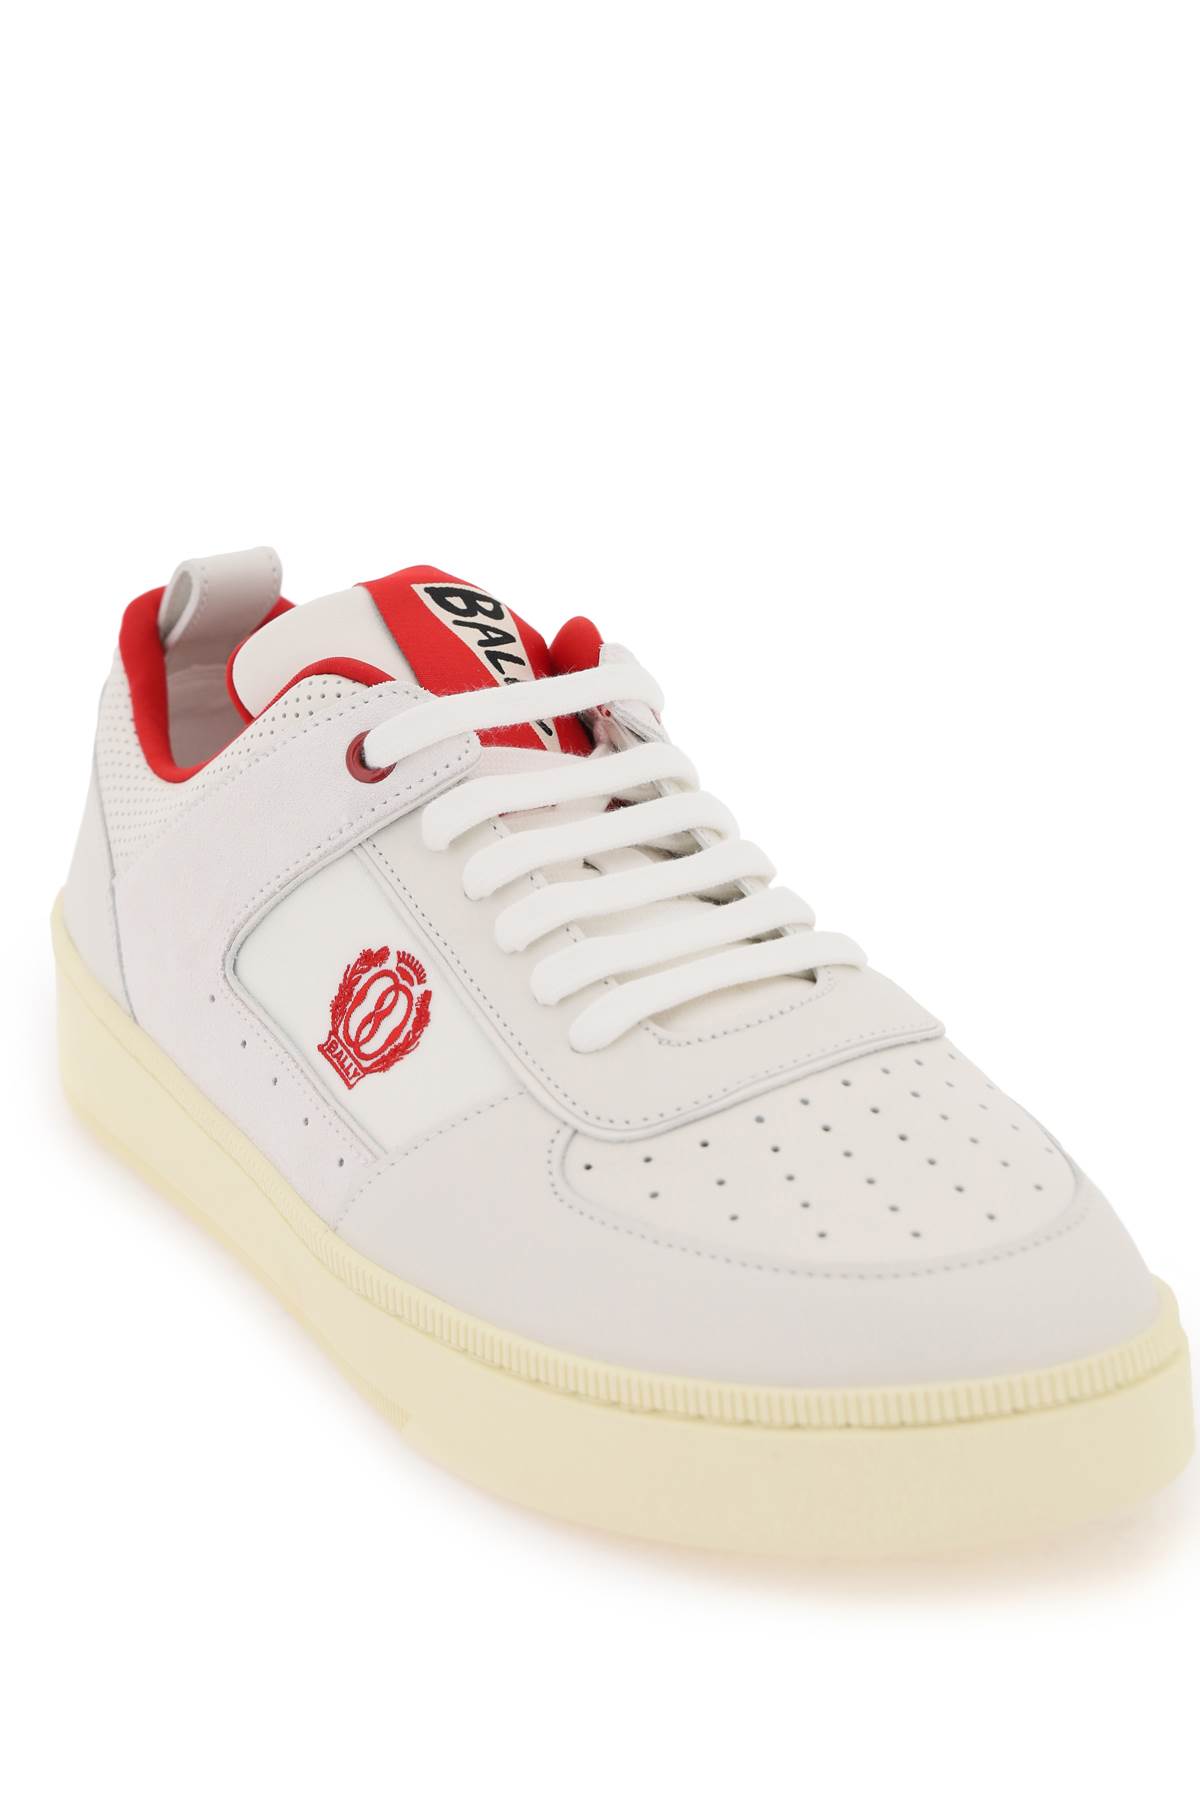 Shop Bally Leather Riweira Sneakers In White Lipstick (white)